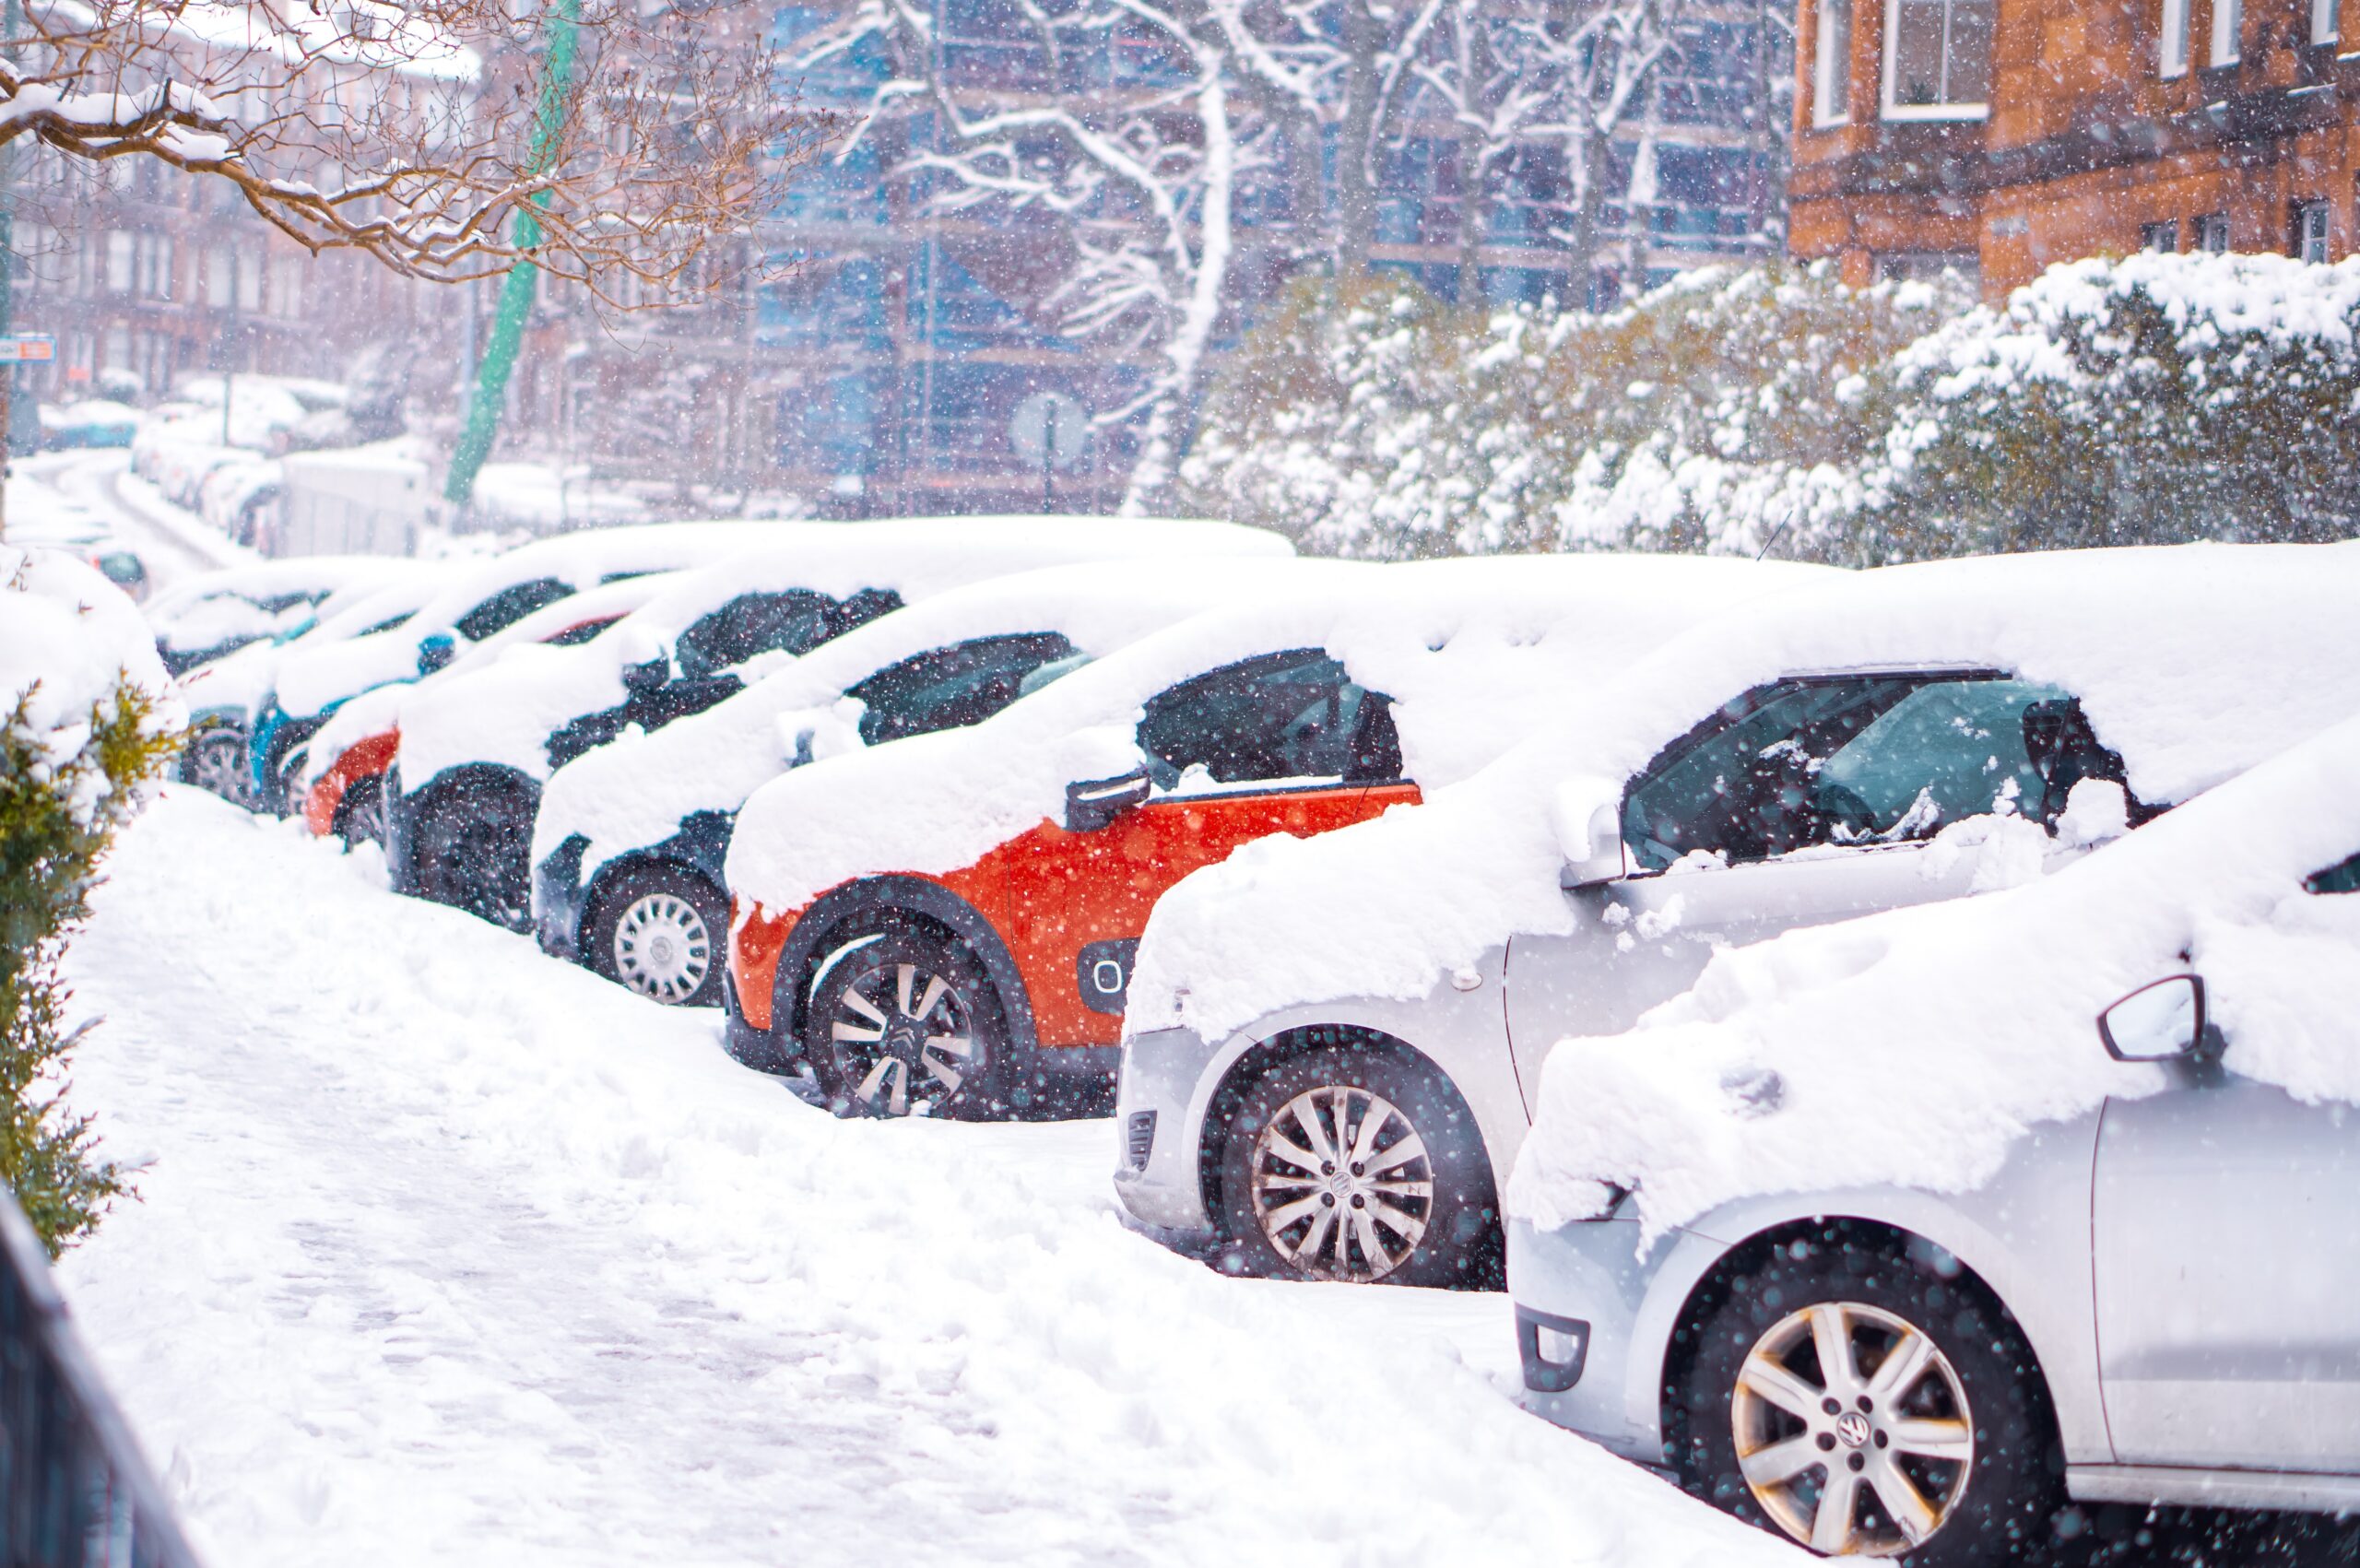 Buyer's Guide: All-Season vs. All-Weather vs. Winter (Snow) Tires